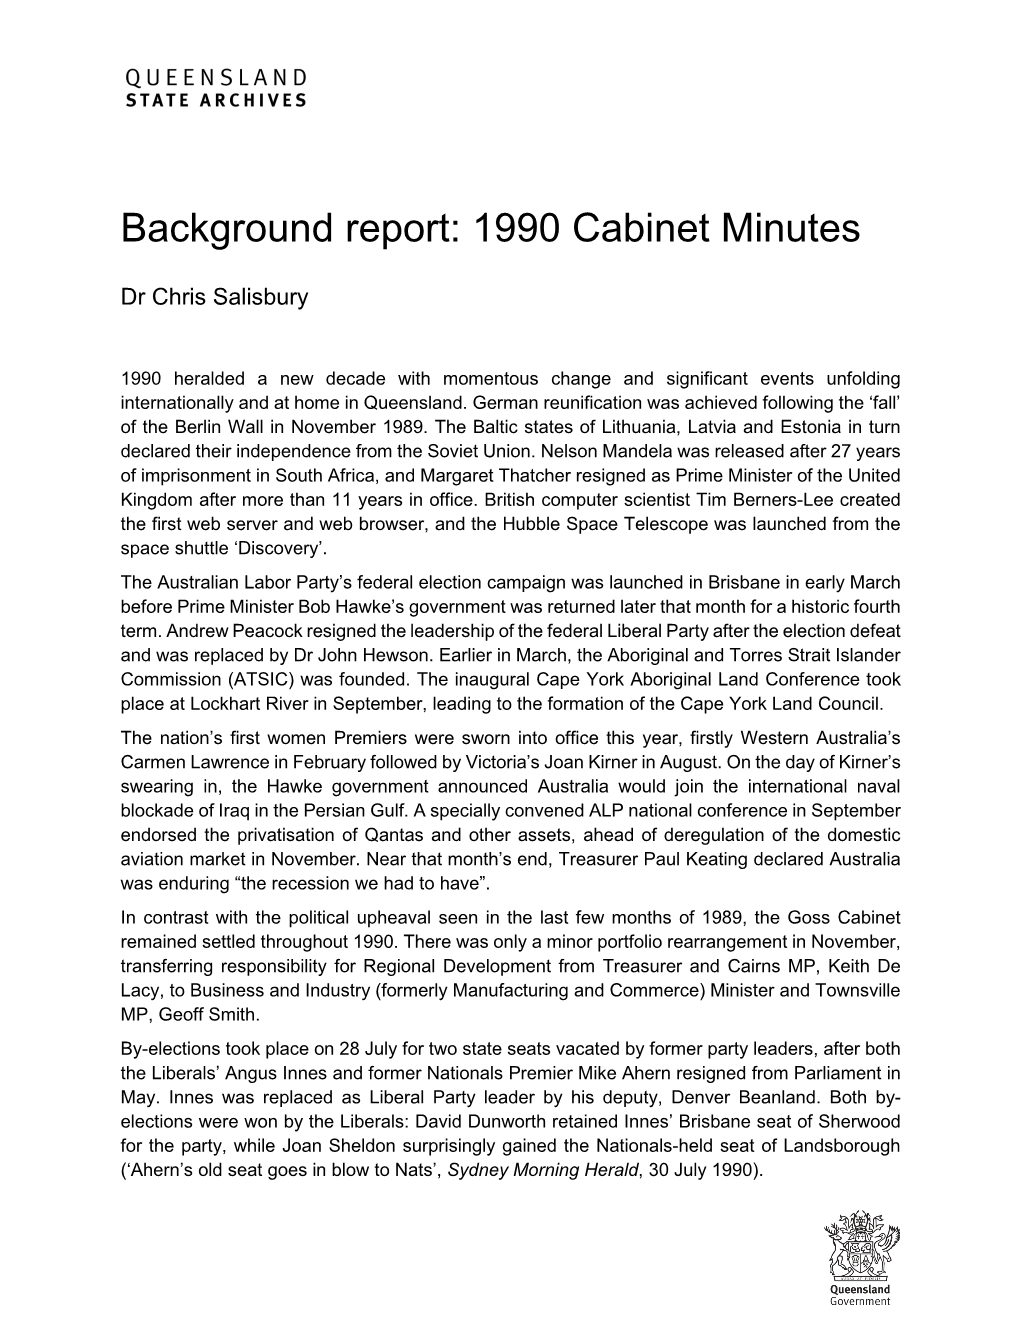 Background Report: 1990 Cabinet Minutes